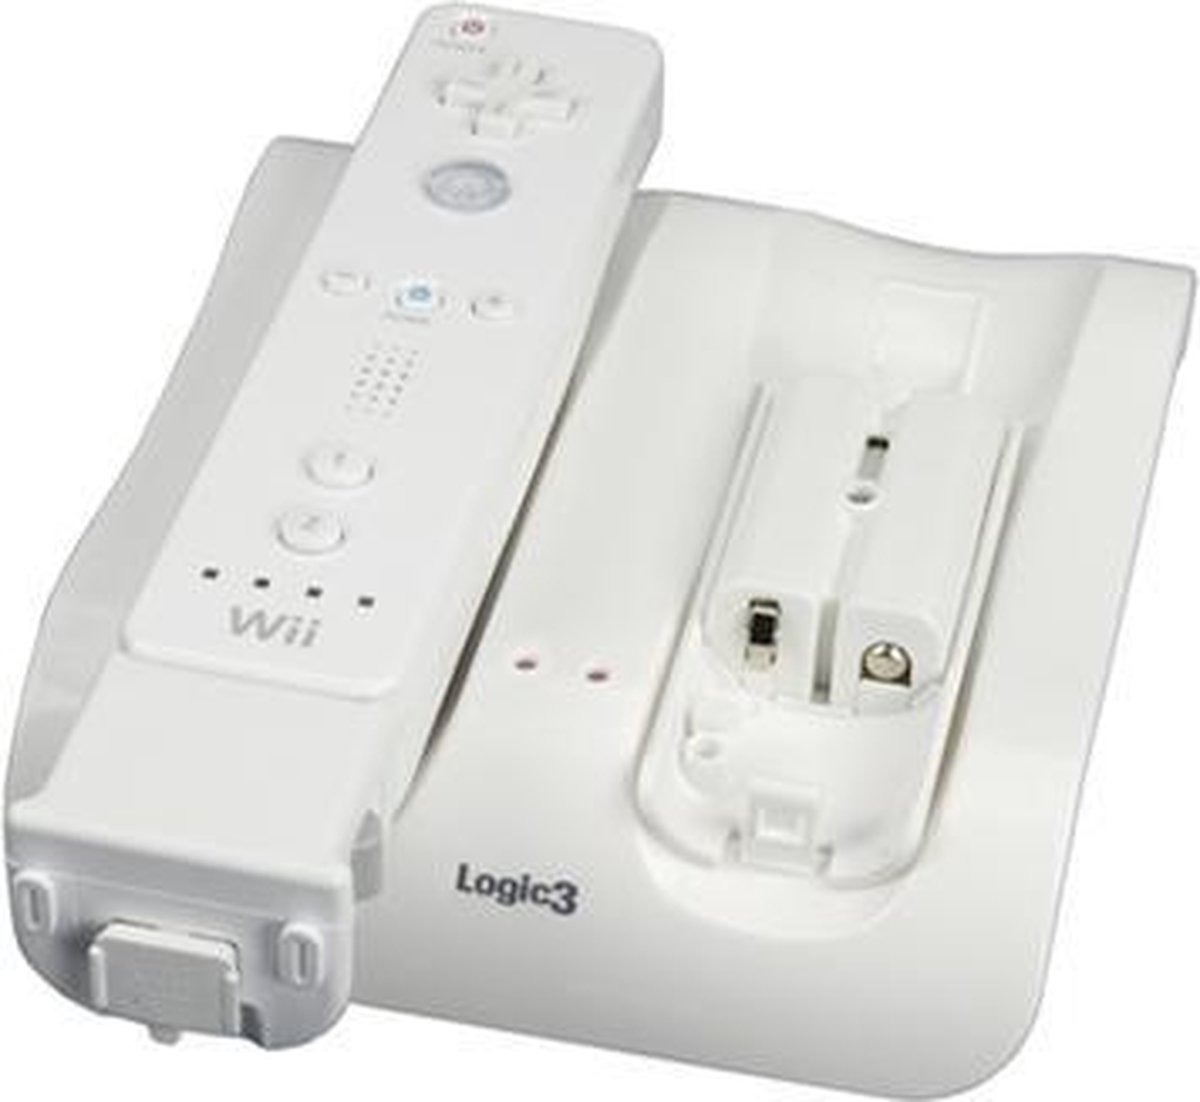 Logic3 Inductie Oplader Incl. 2 Battery Packs Wit Wii | bol.com